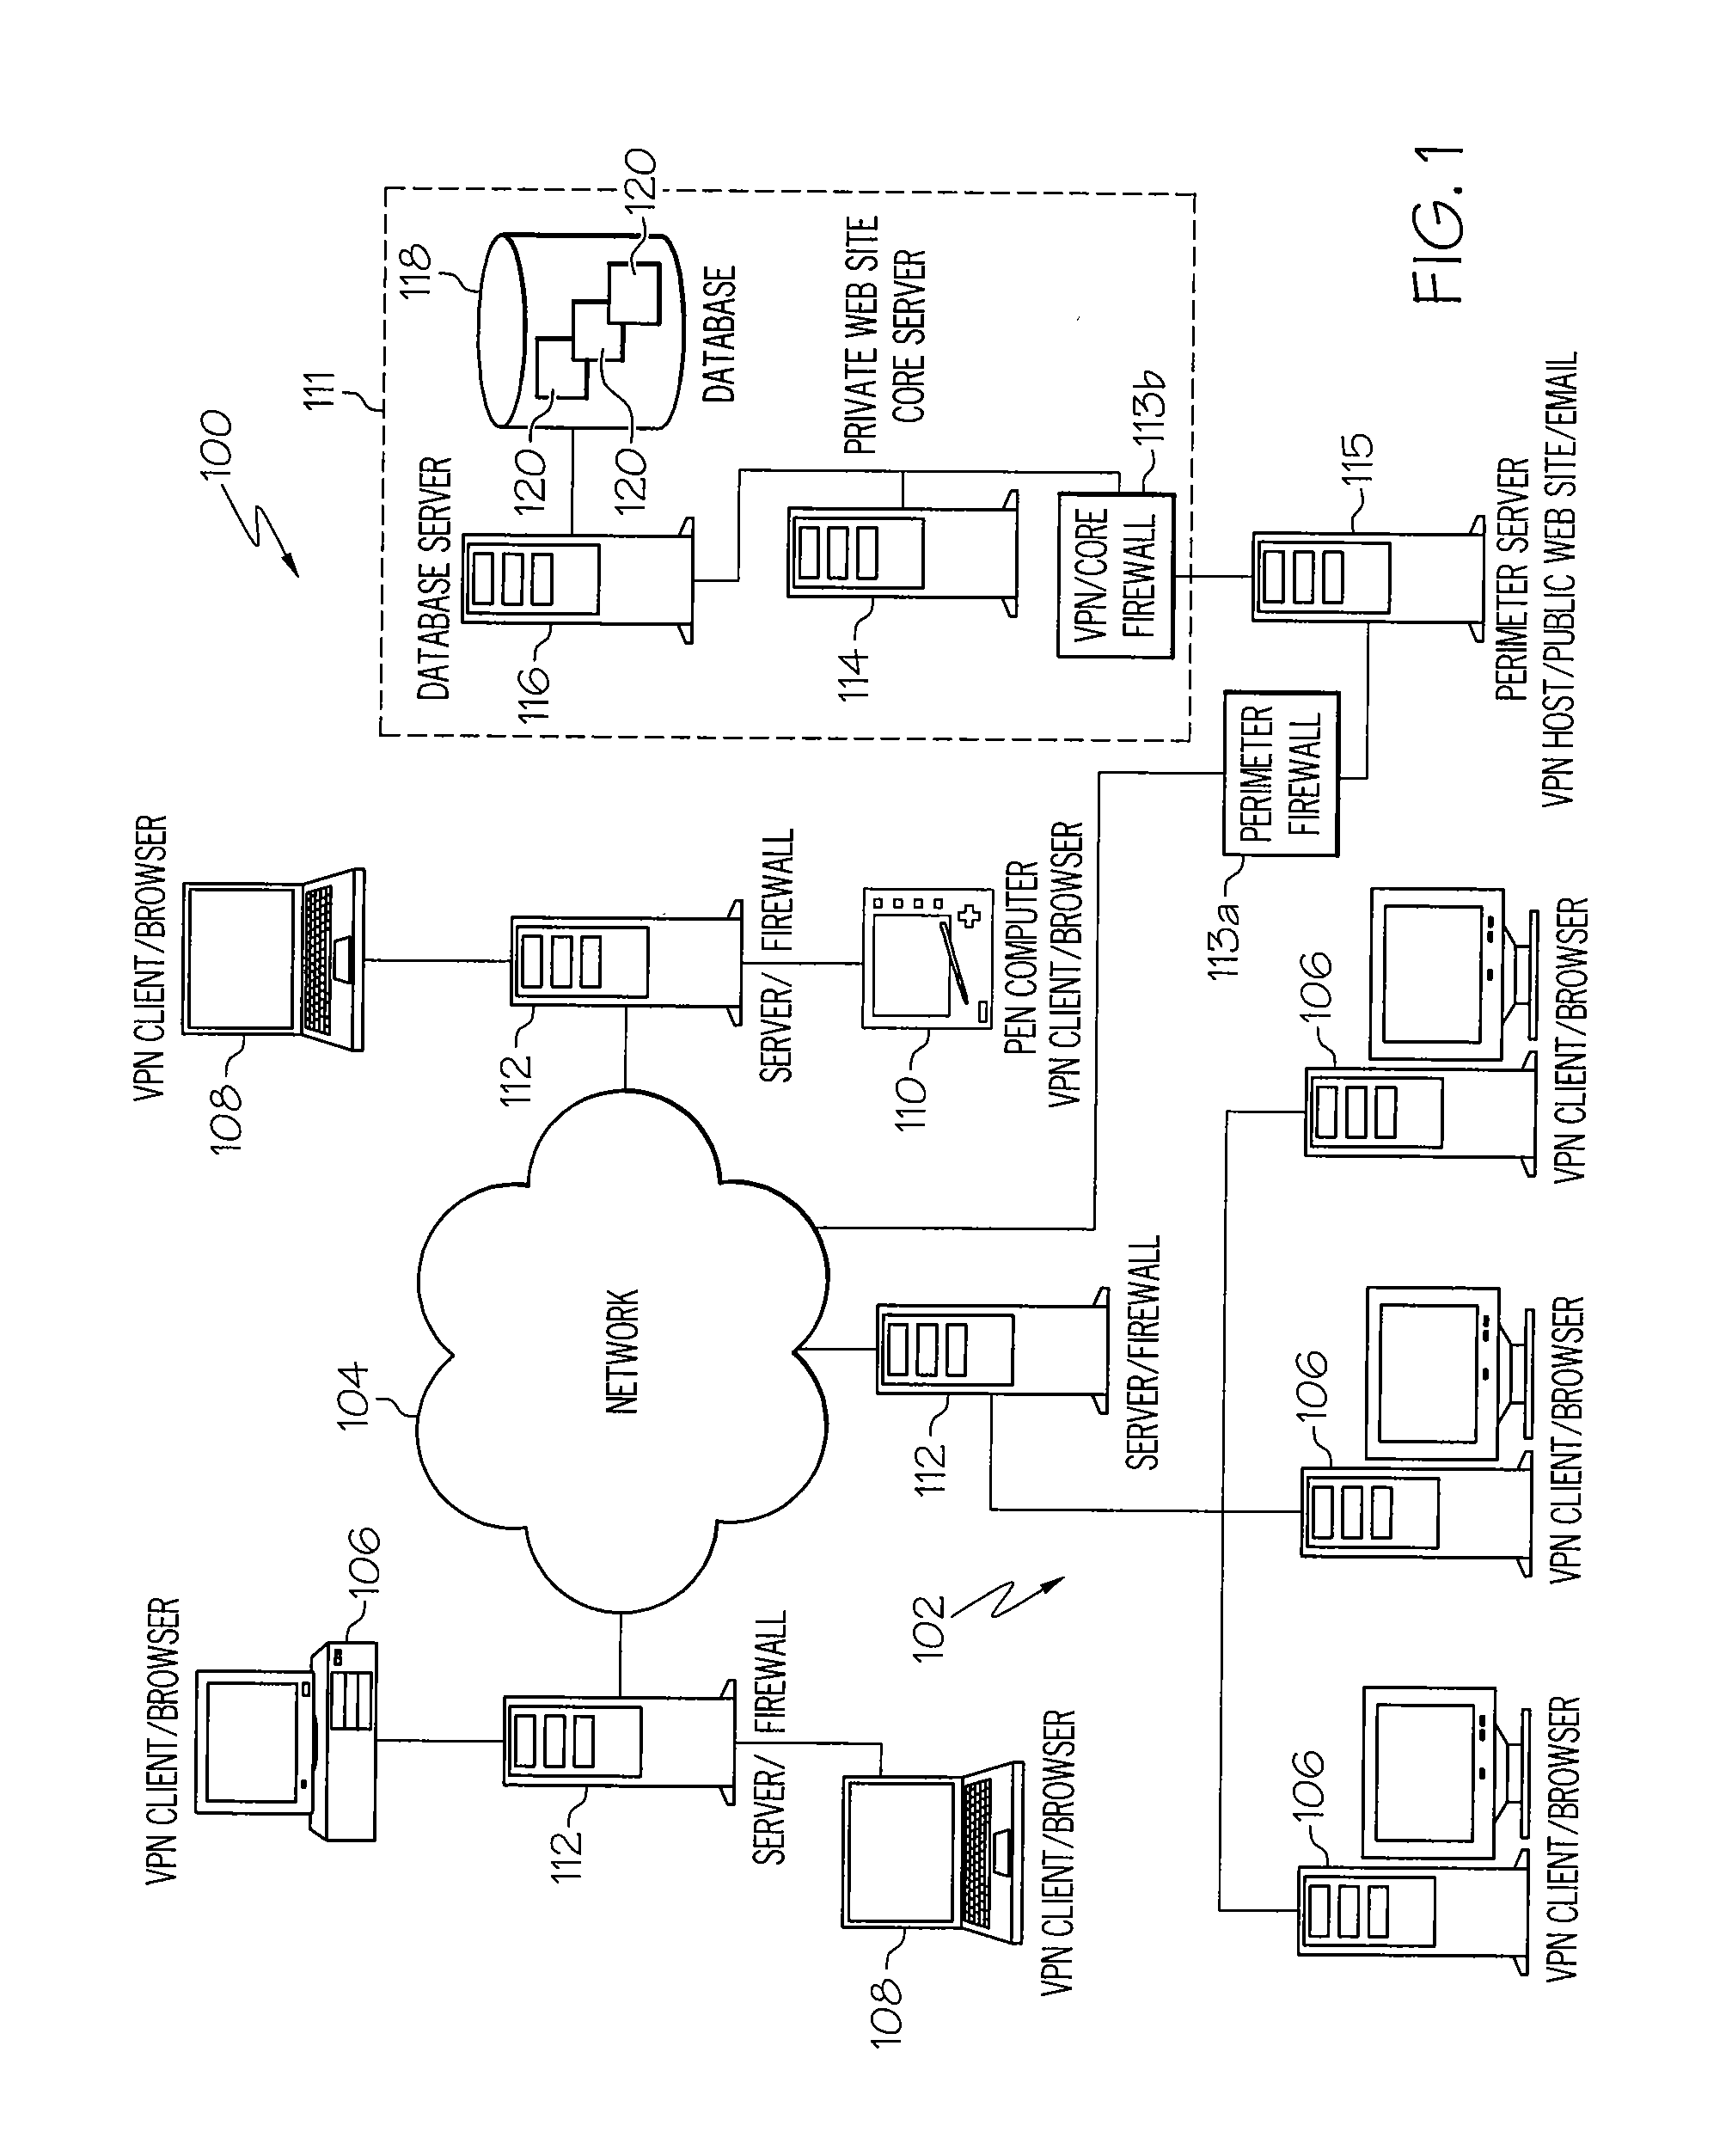 System, method, and article of manufacture for managing a health and human services regional network